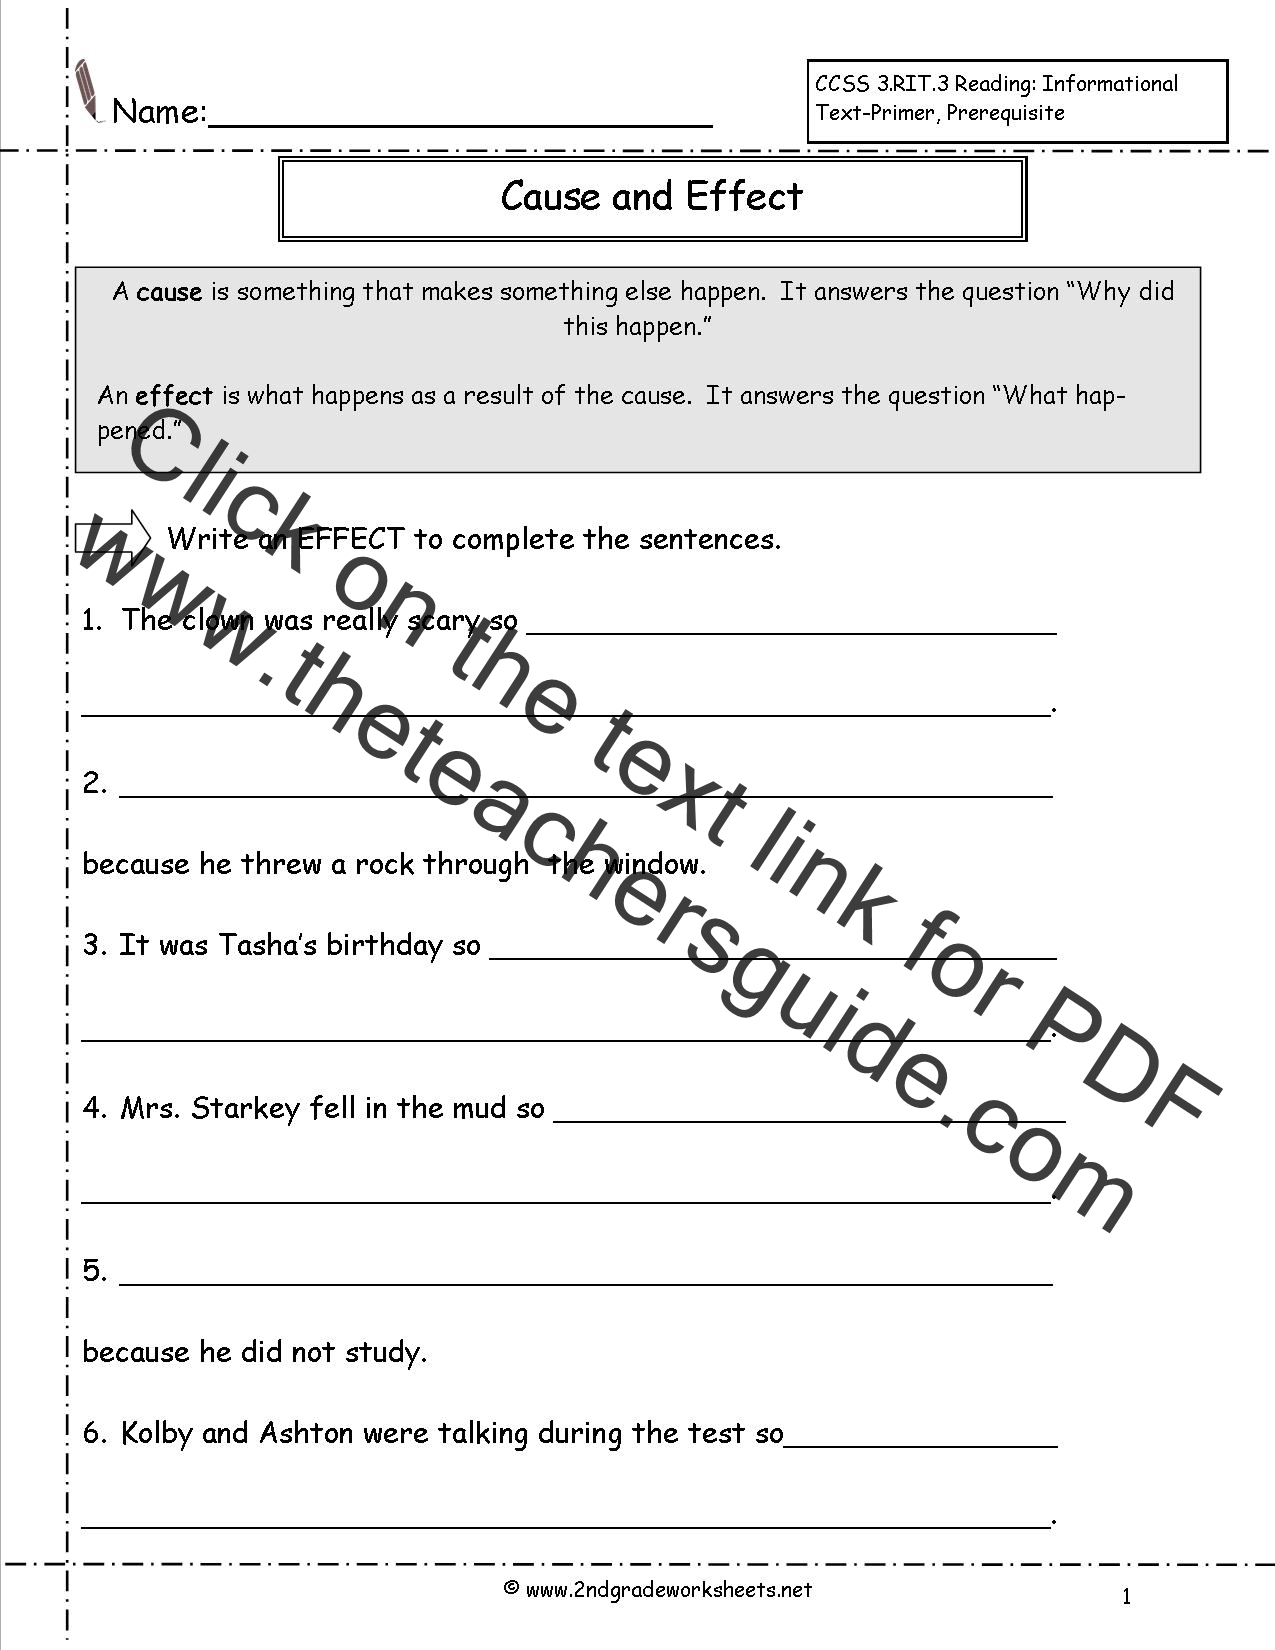 cause-and-effect-worksheet-answers